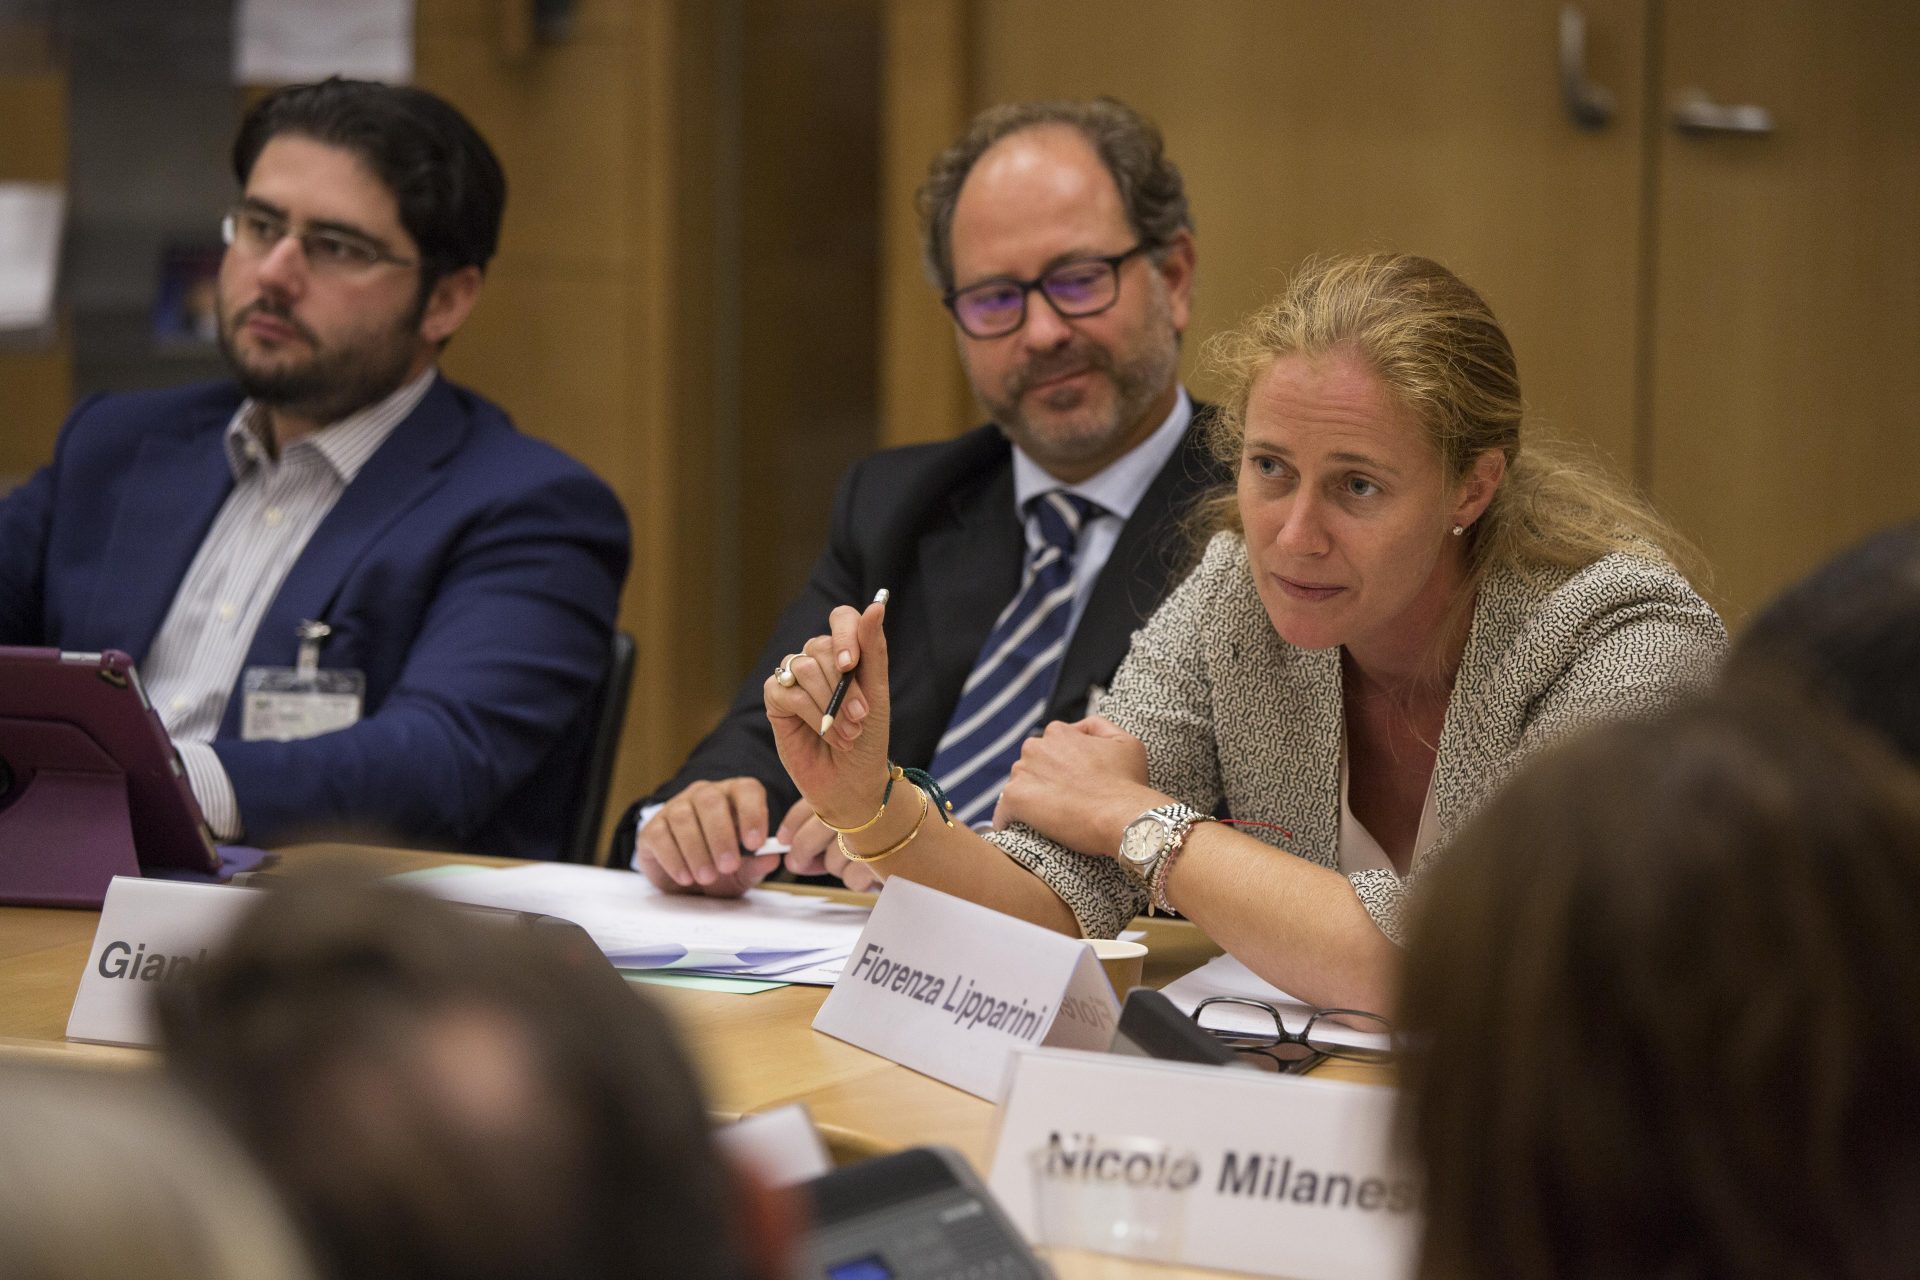 Fiorenza Lipparini in the First annual meeting of Re-Imagine Europa at the OECD in Paris